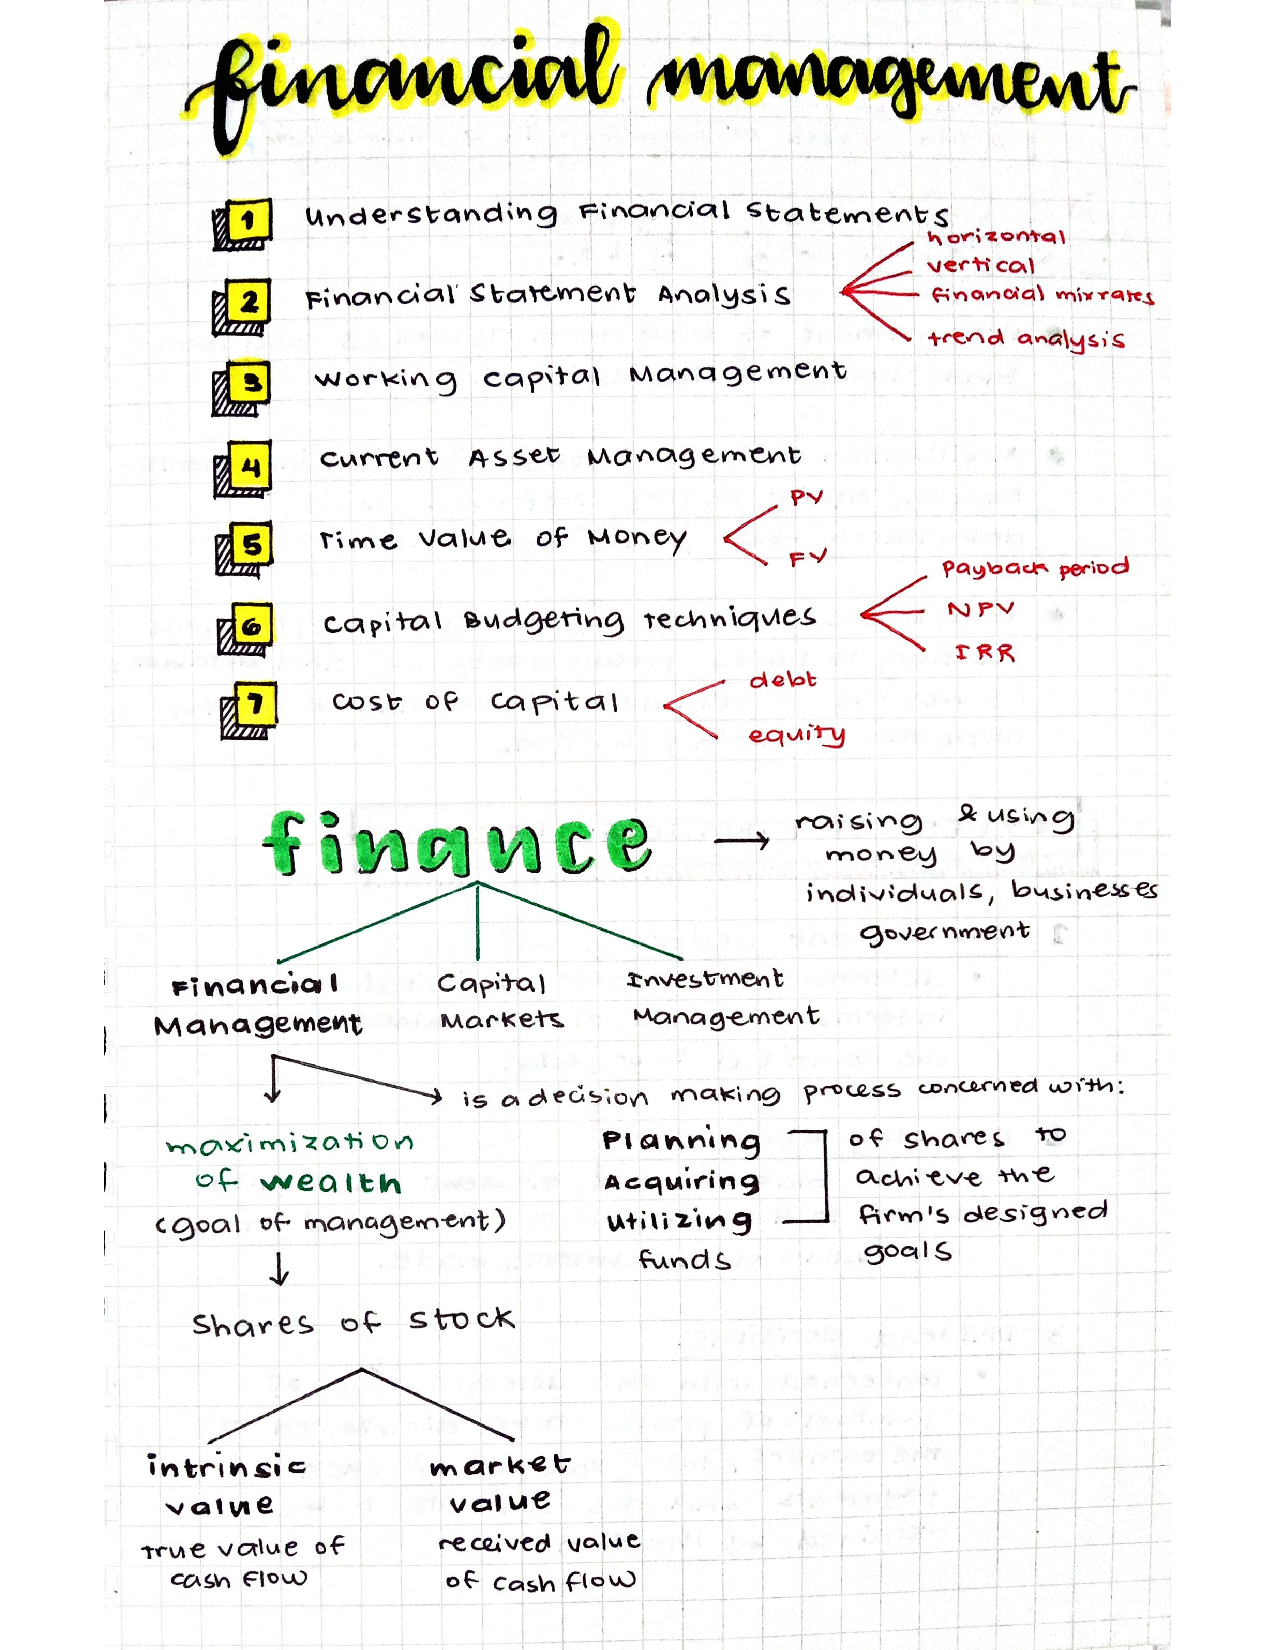 Financial management study notes